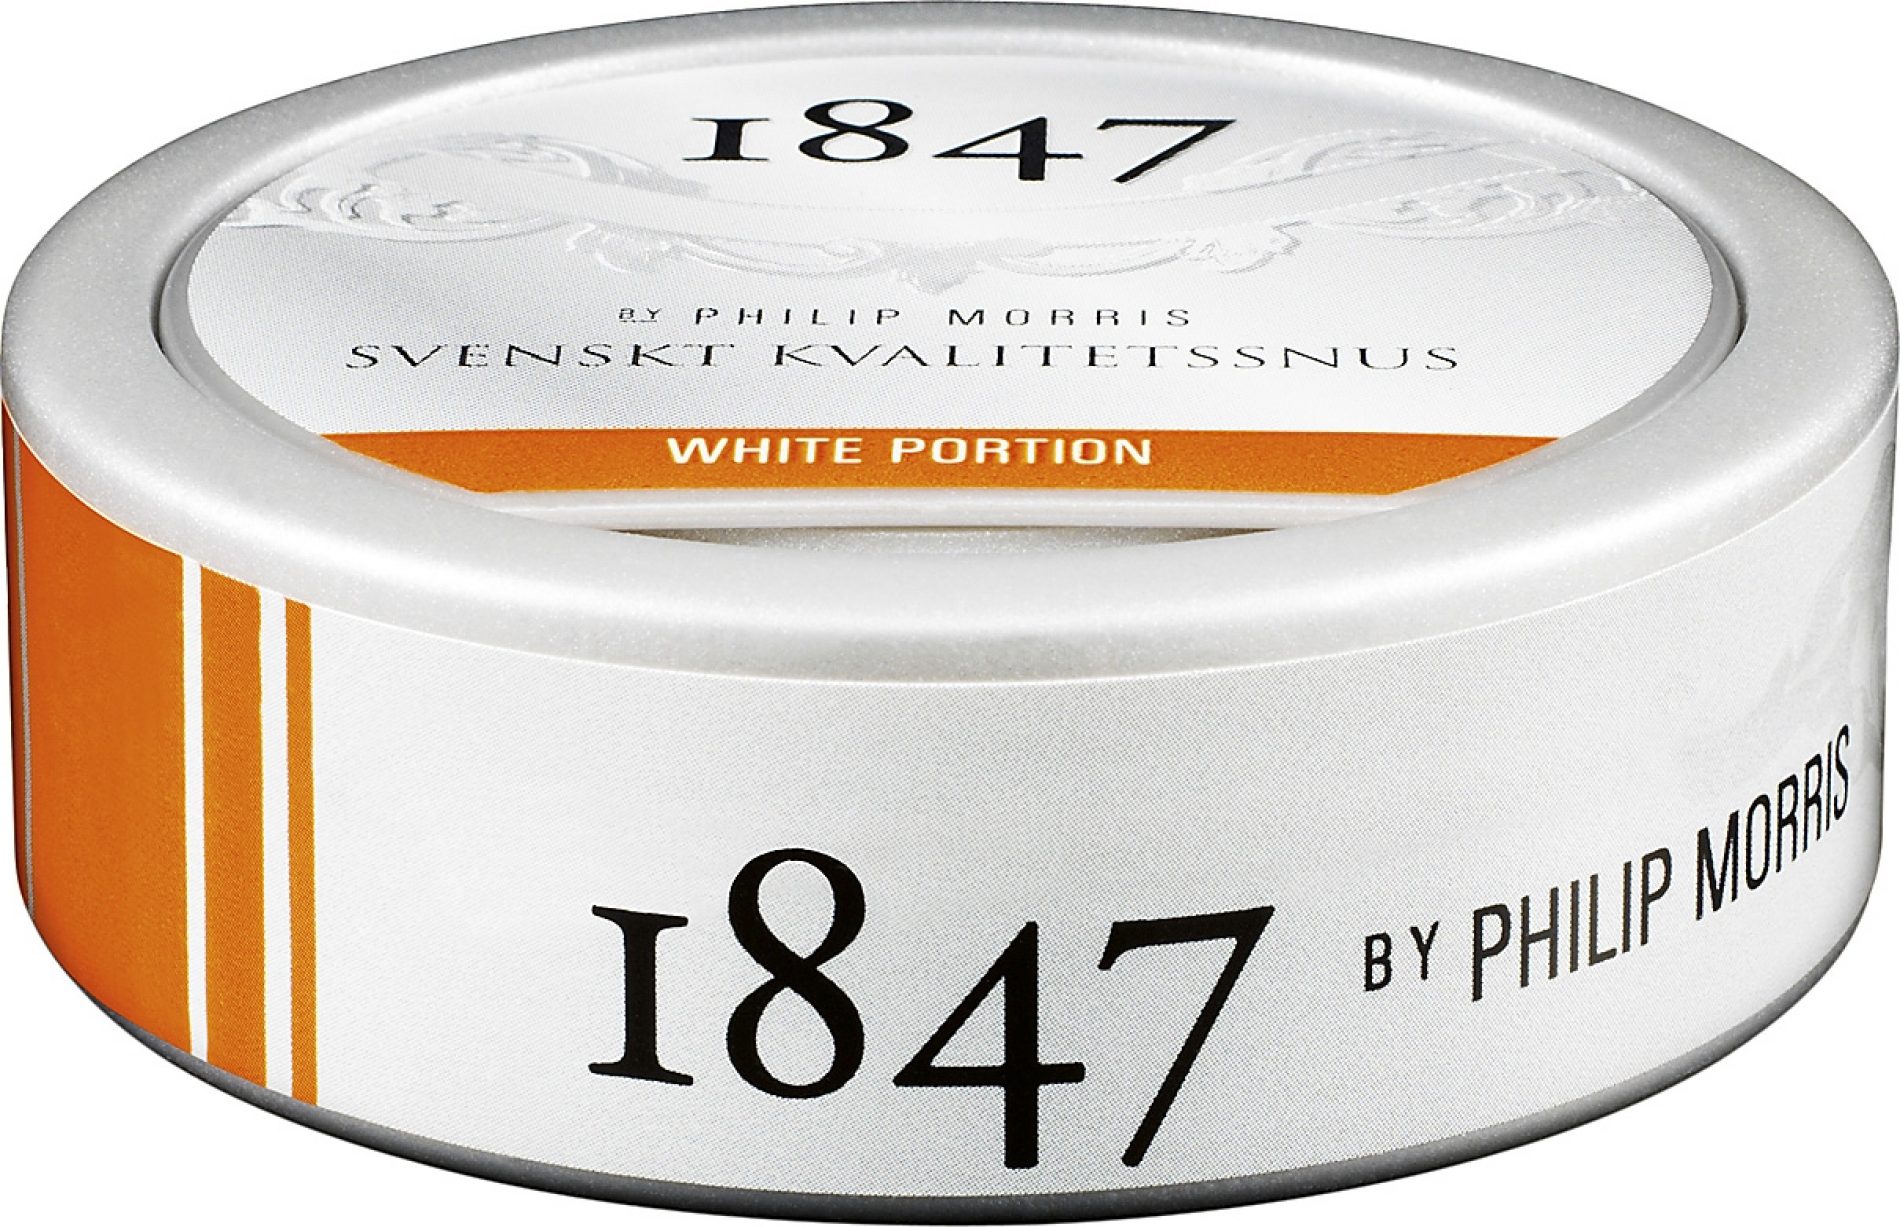 New Look for 1847 Snus…and maybe more?